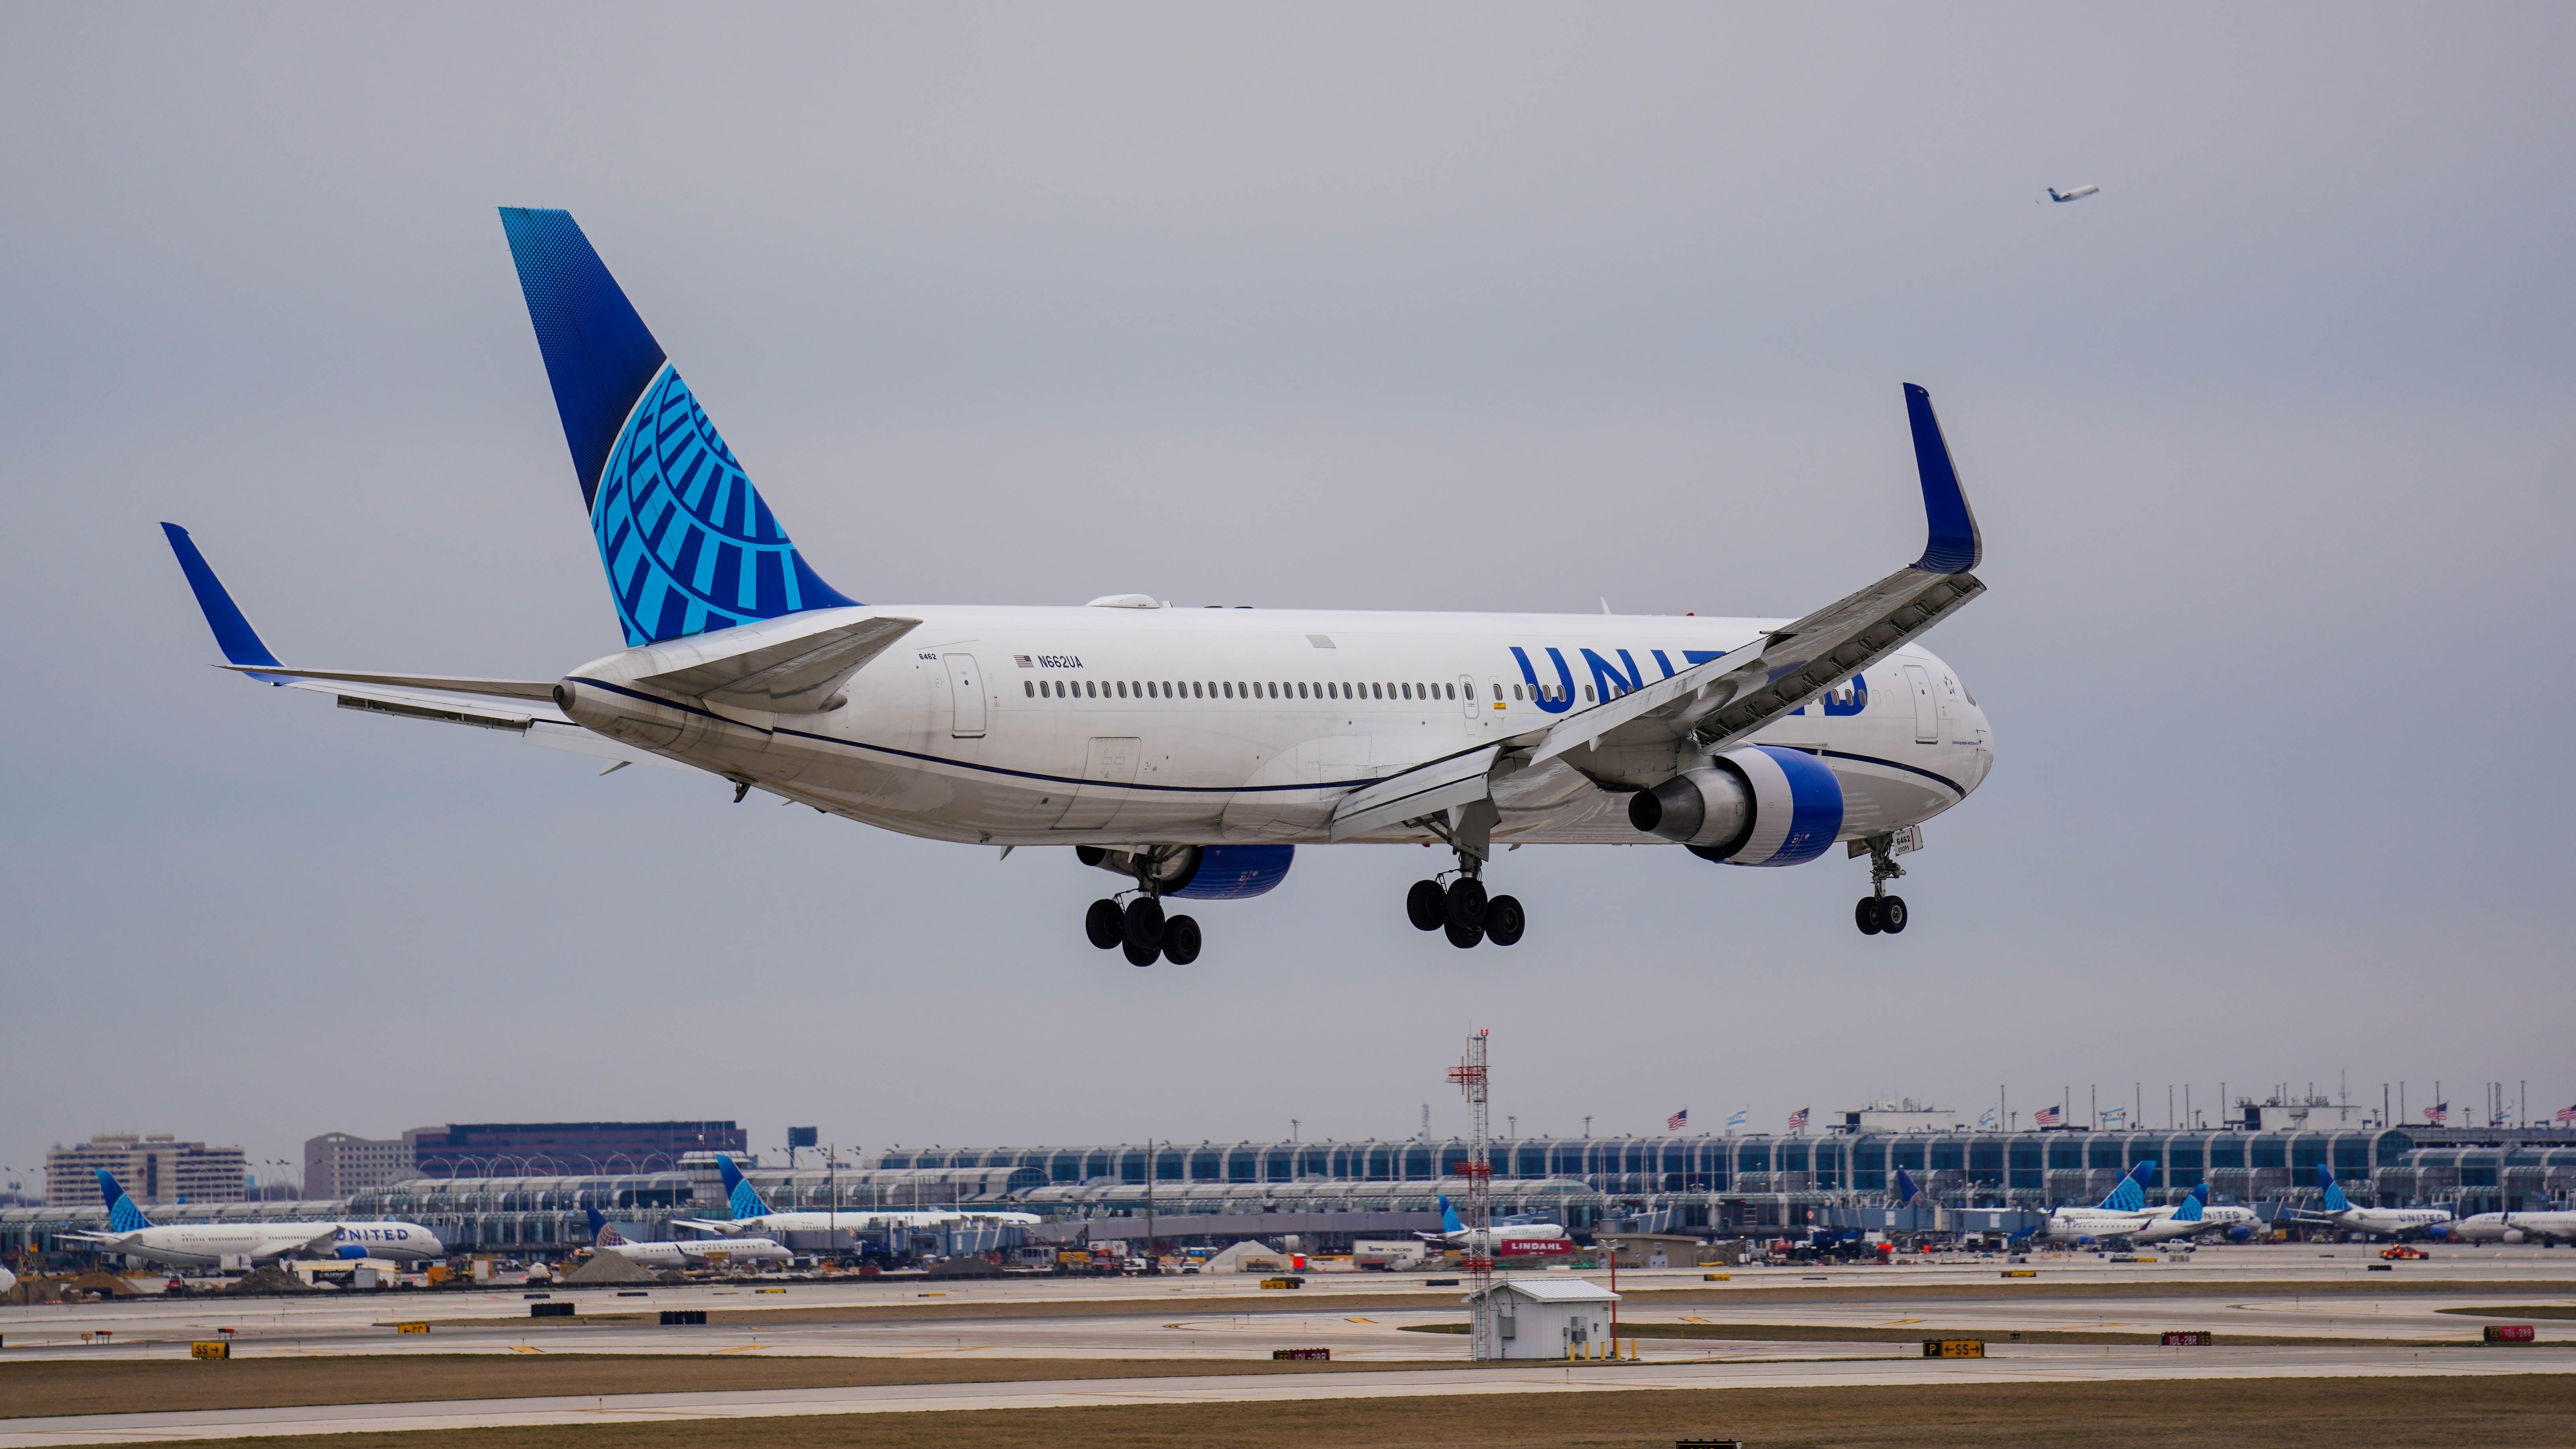 A United Airlines Boeing 767 landing